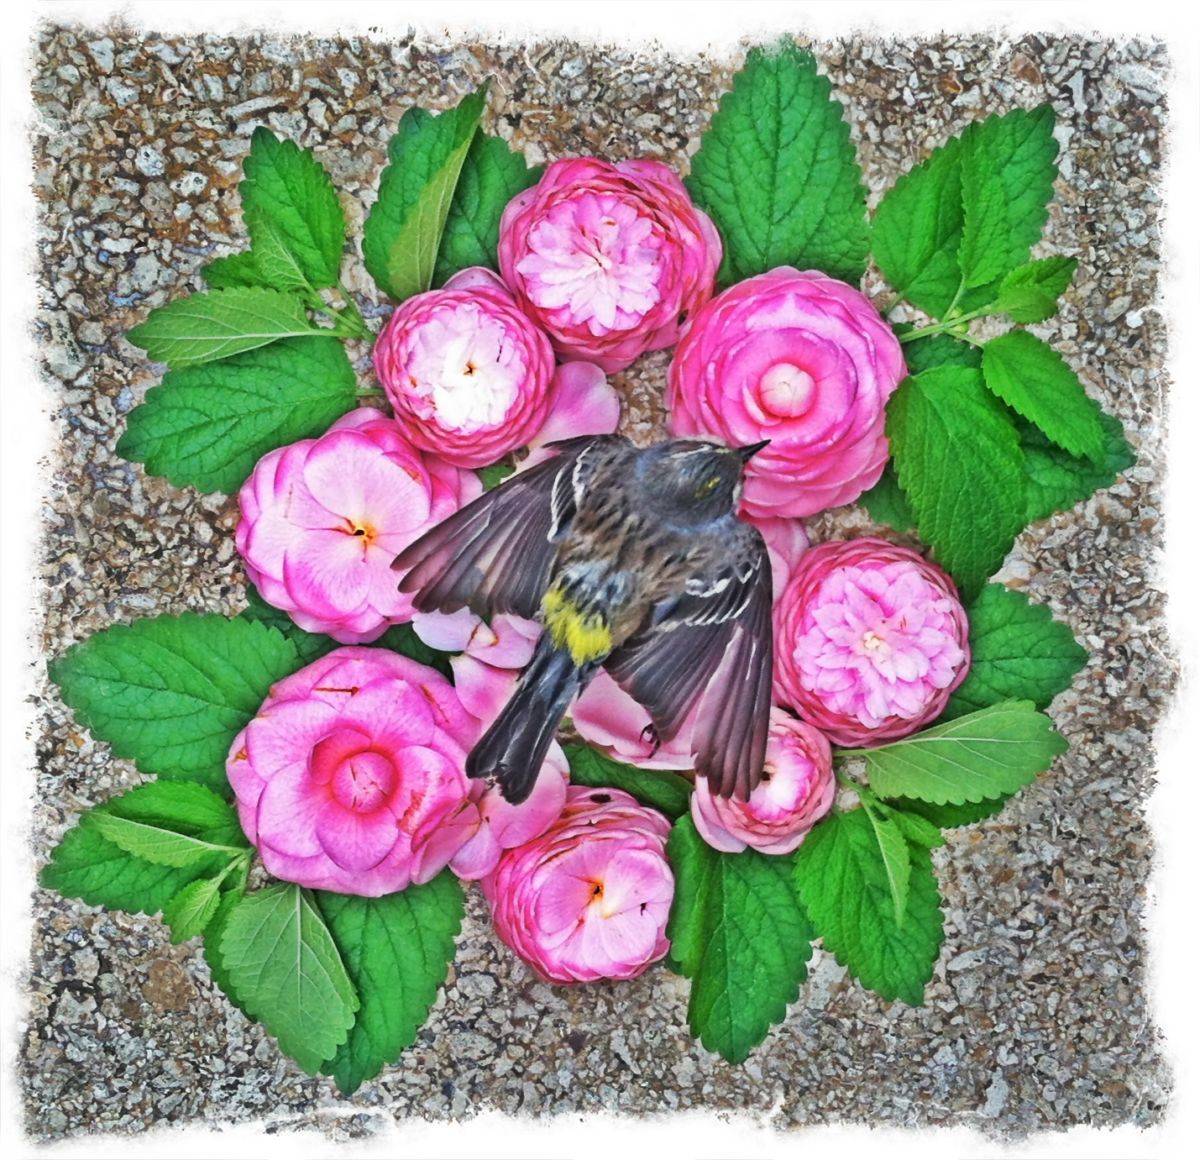 A Nature Mandala created to honor a dead bird I found in my garden.